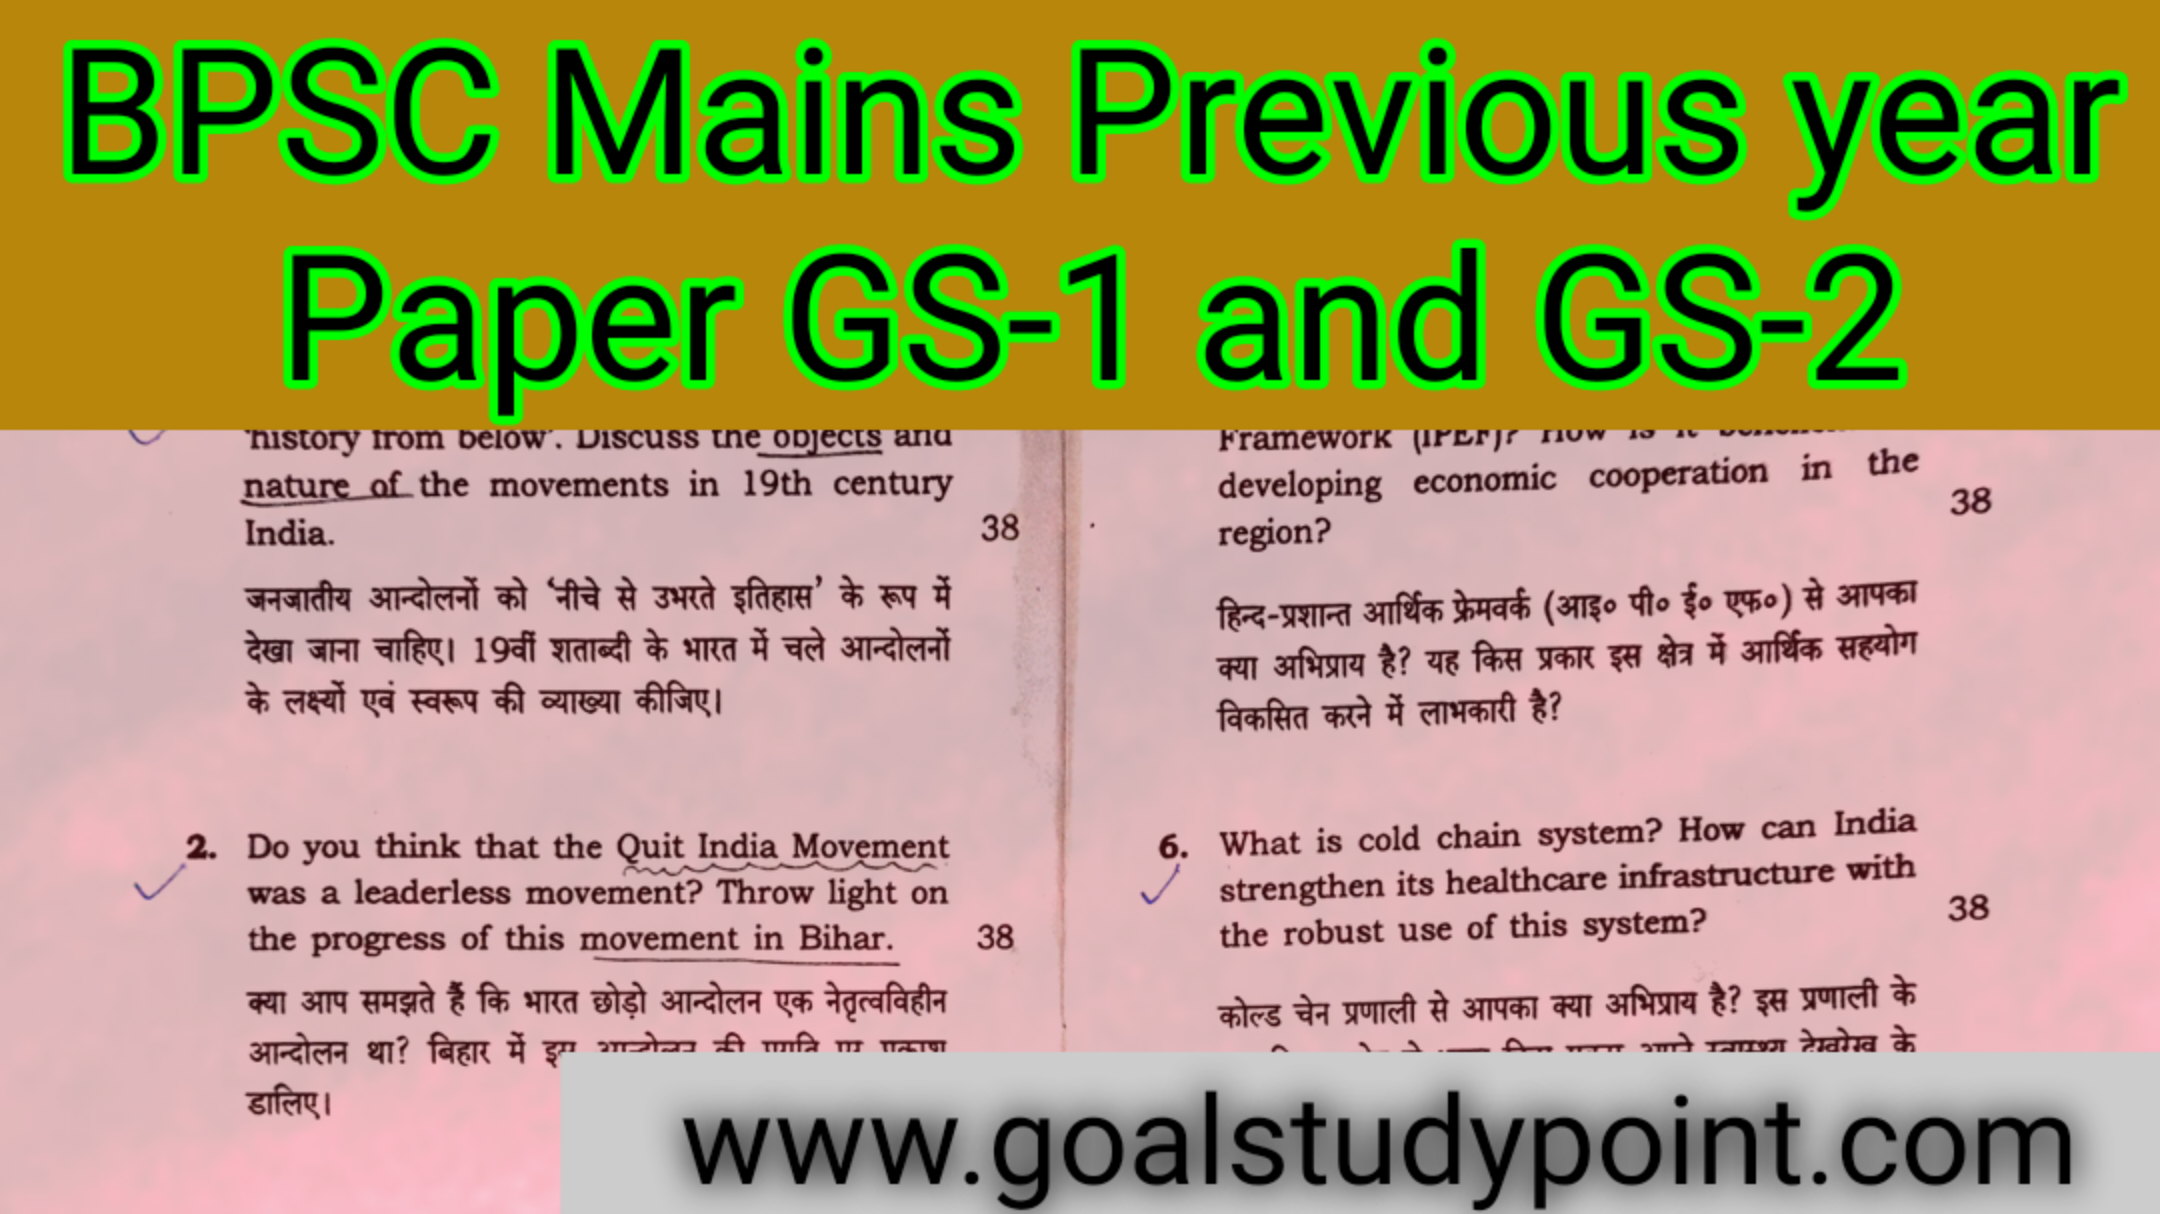 BPSC mains Auditor Mains Questions paper pdf